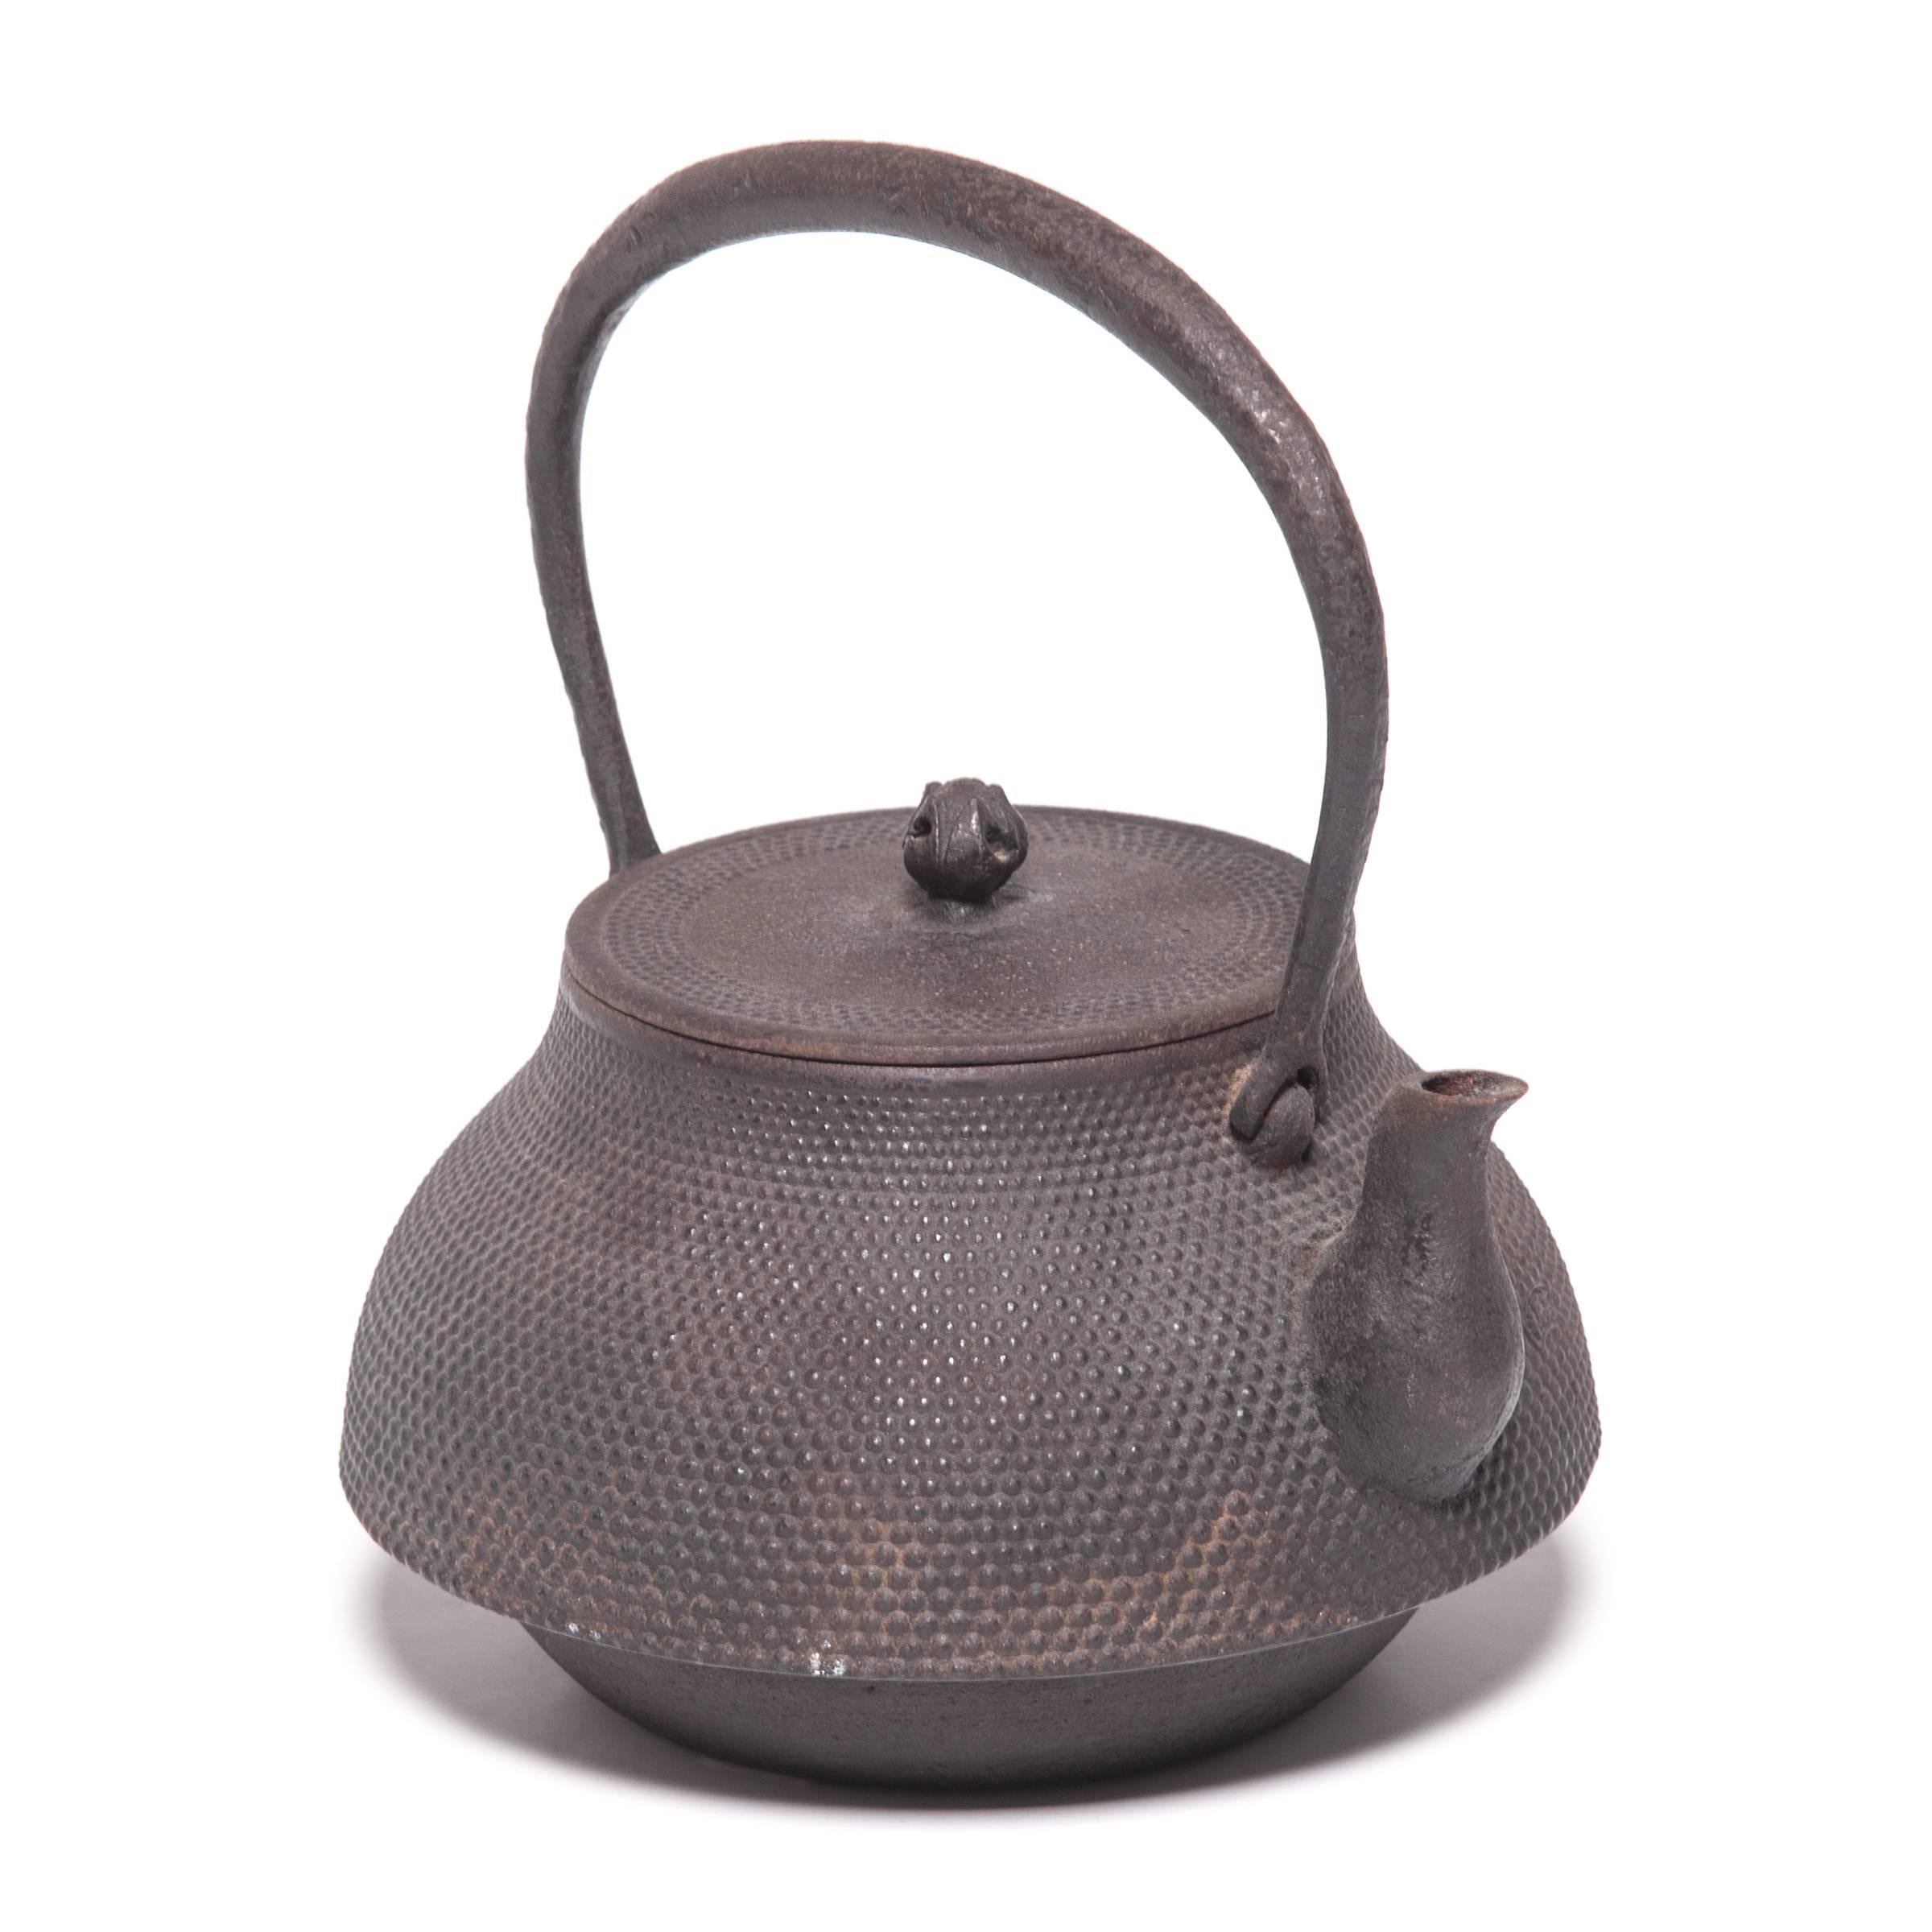 Decorated with a dotted, textured surface and an elegant arched handle, this Japanese teapot was used to boil water for traditional tea ceremonies. Known as tetsubin, the kettle’s cast-iron construction is said to change the quality of the water,